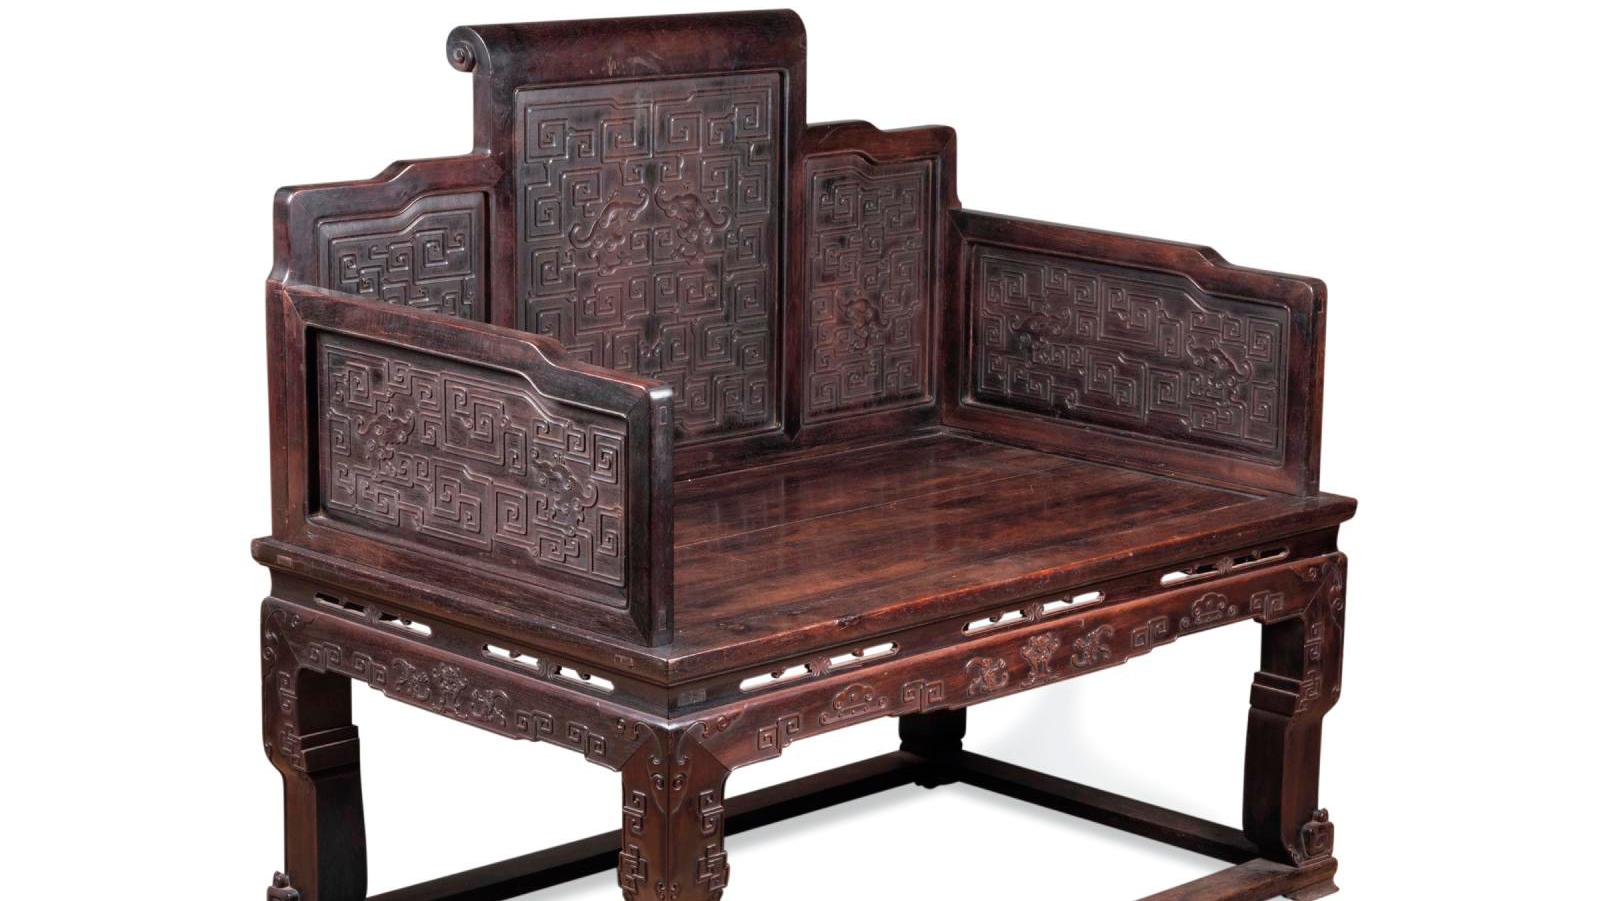 China, 19th century, imperial throne in zitan, stepped backrest carved on each side... A Throne from China